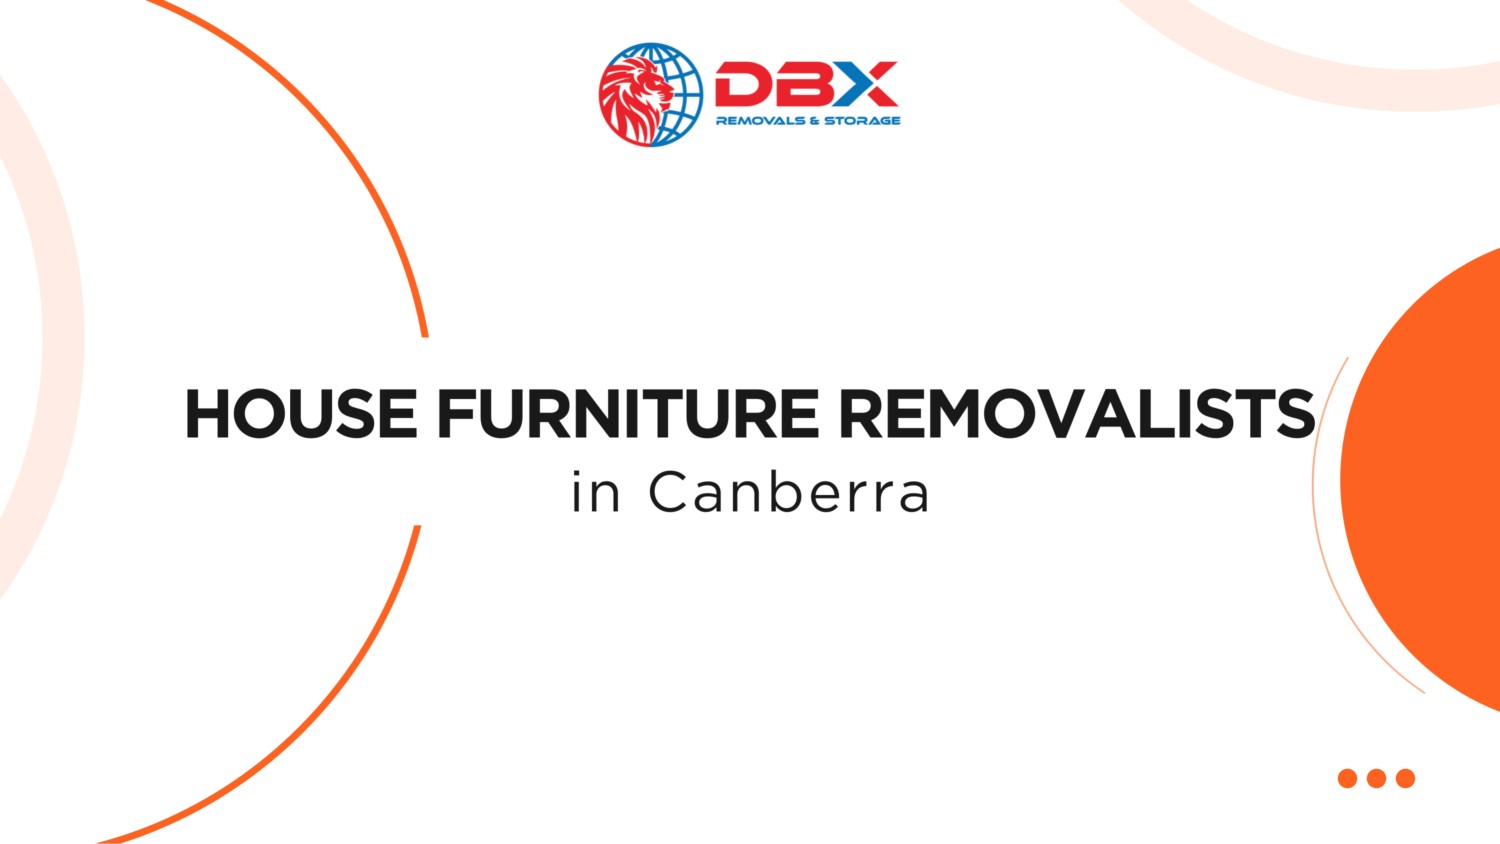 House Furniture Removalists in Canberra